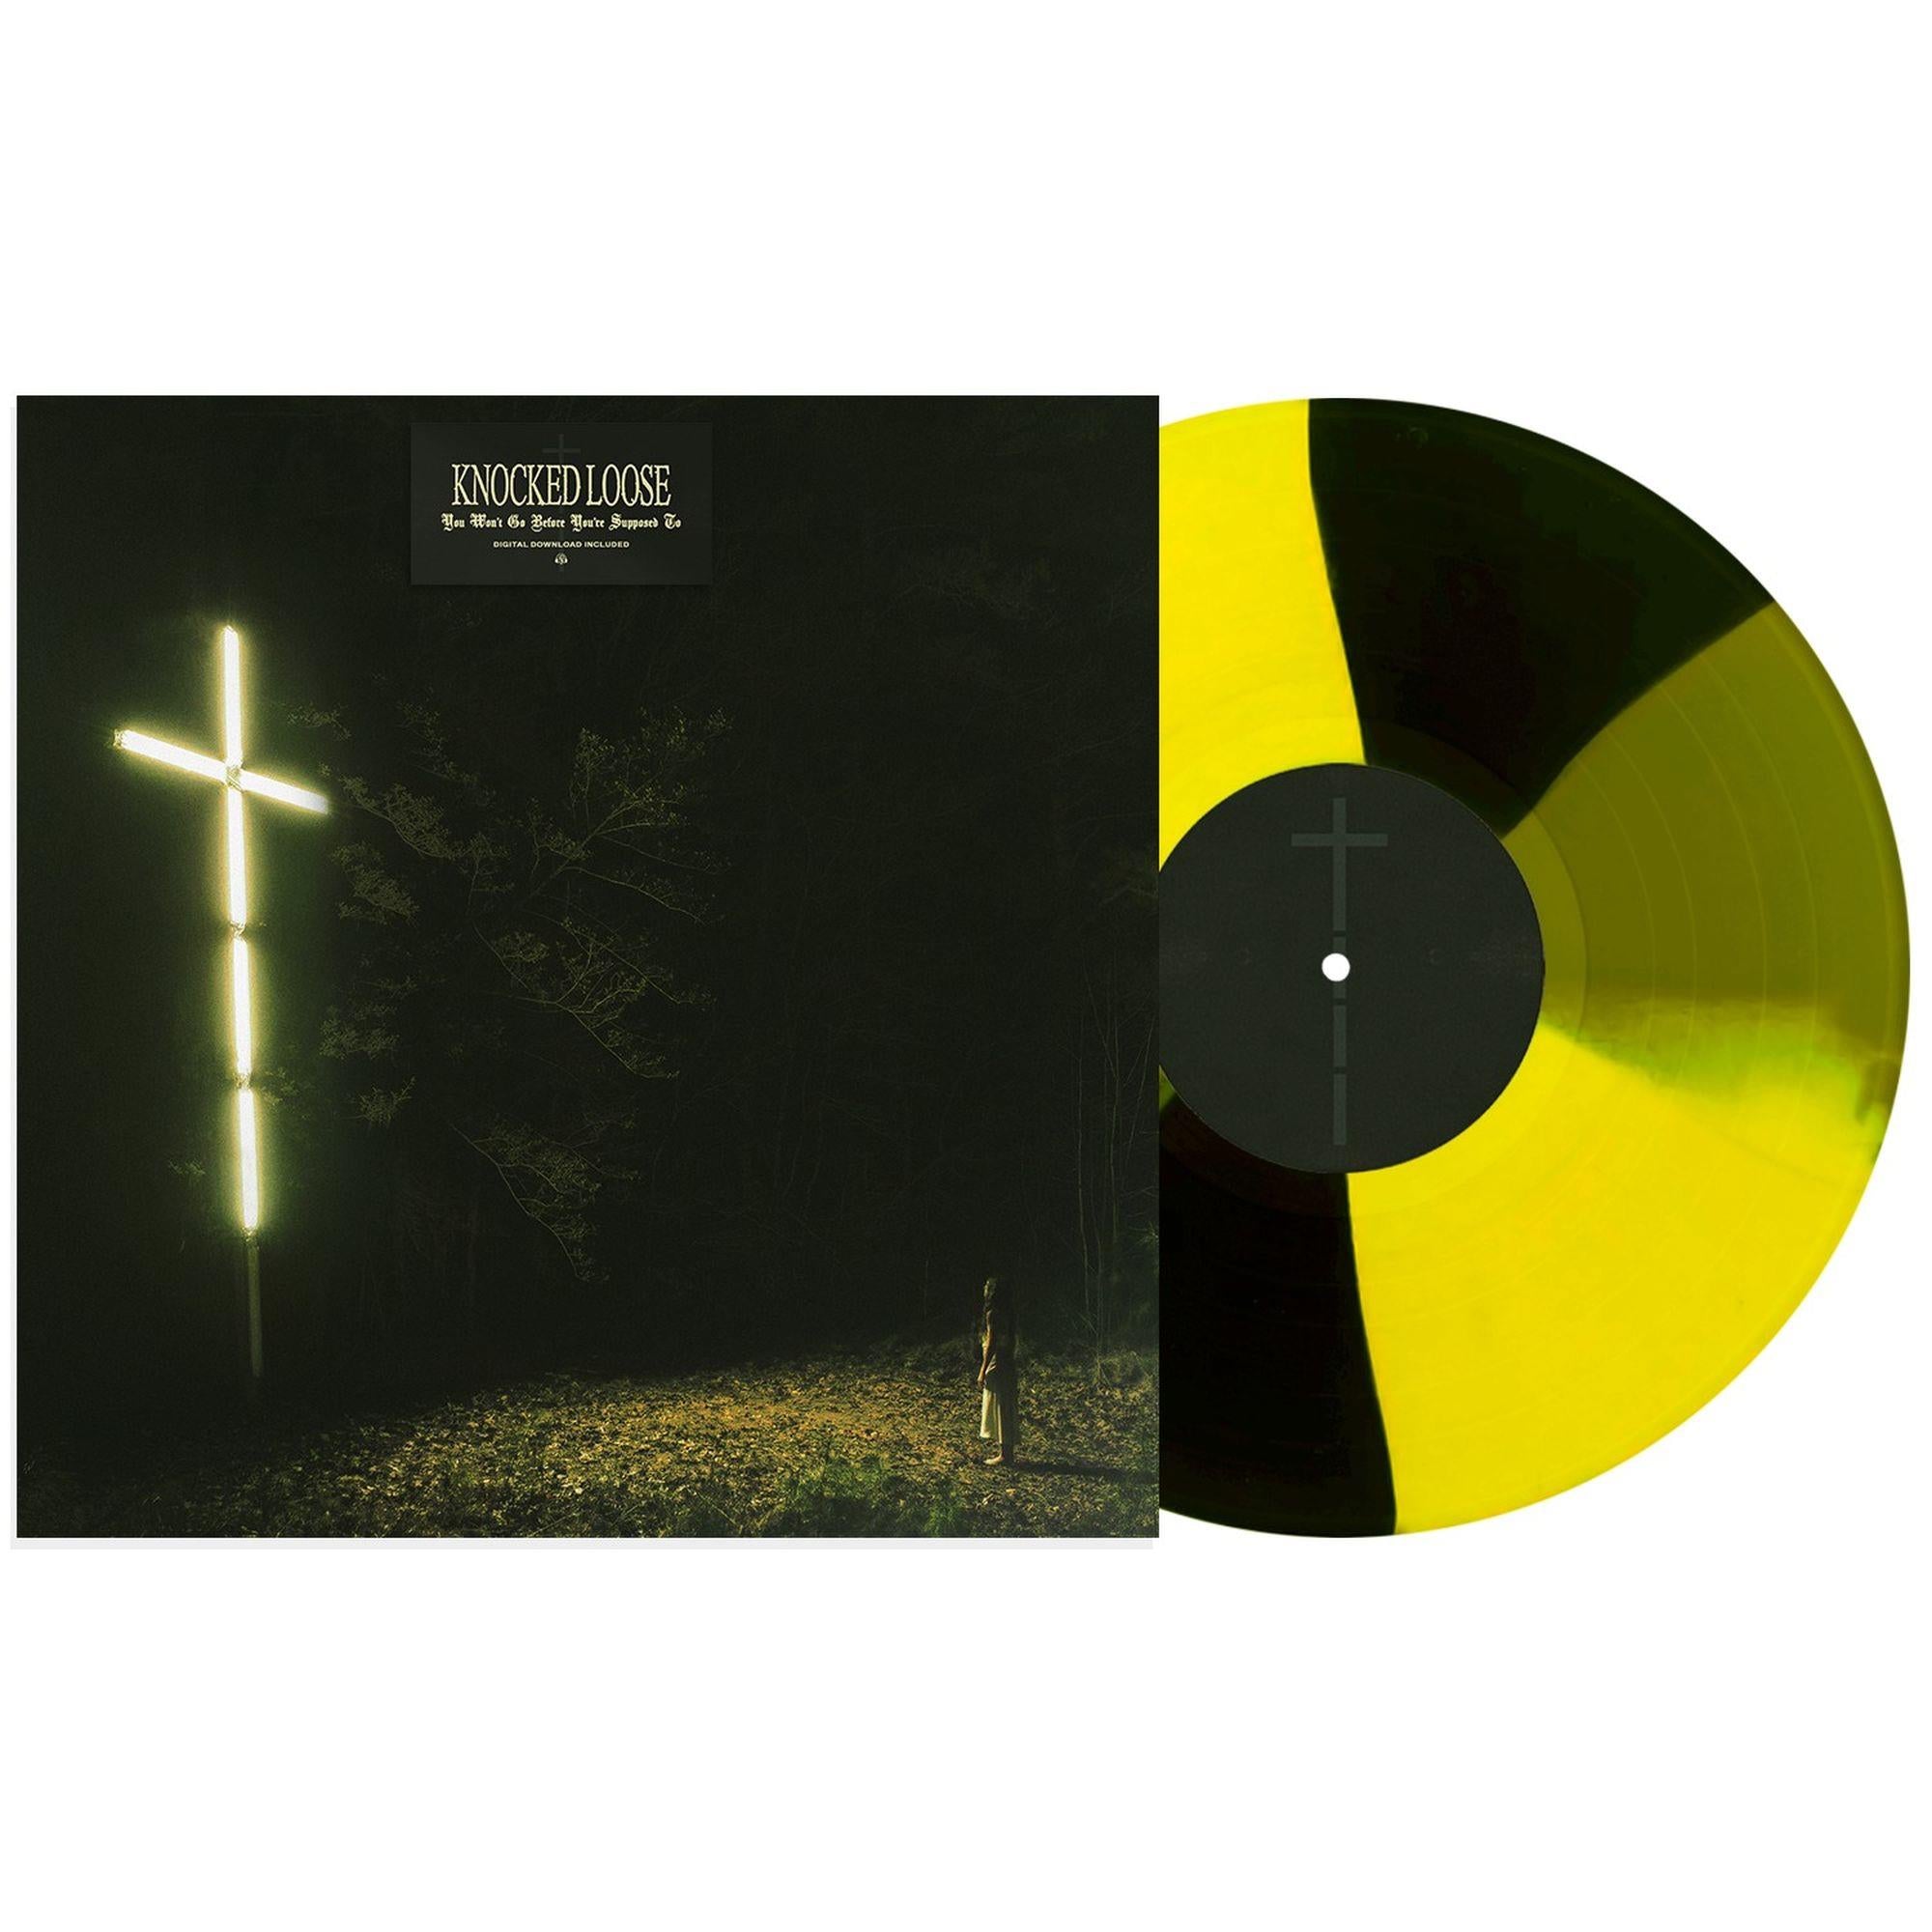 you won't go before you're supposed to (au/nz exclusive swamp green, yellow & black twist vinyl)